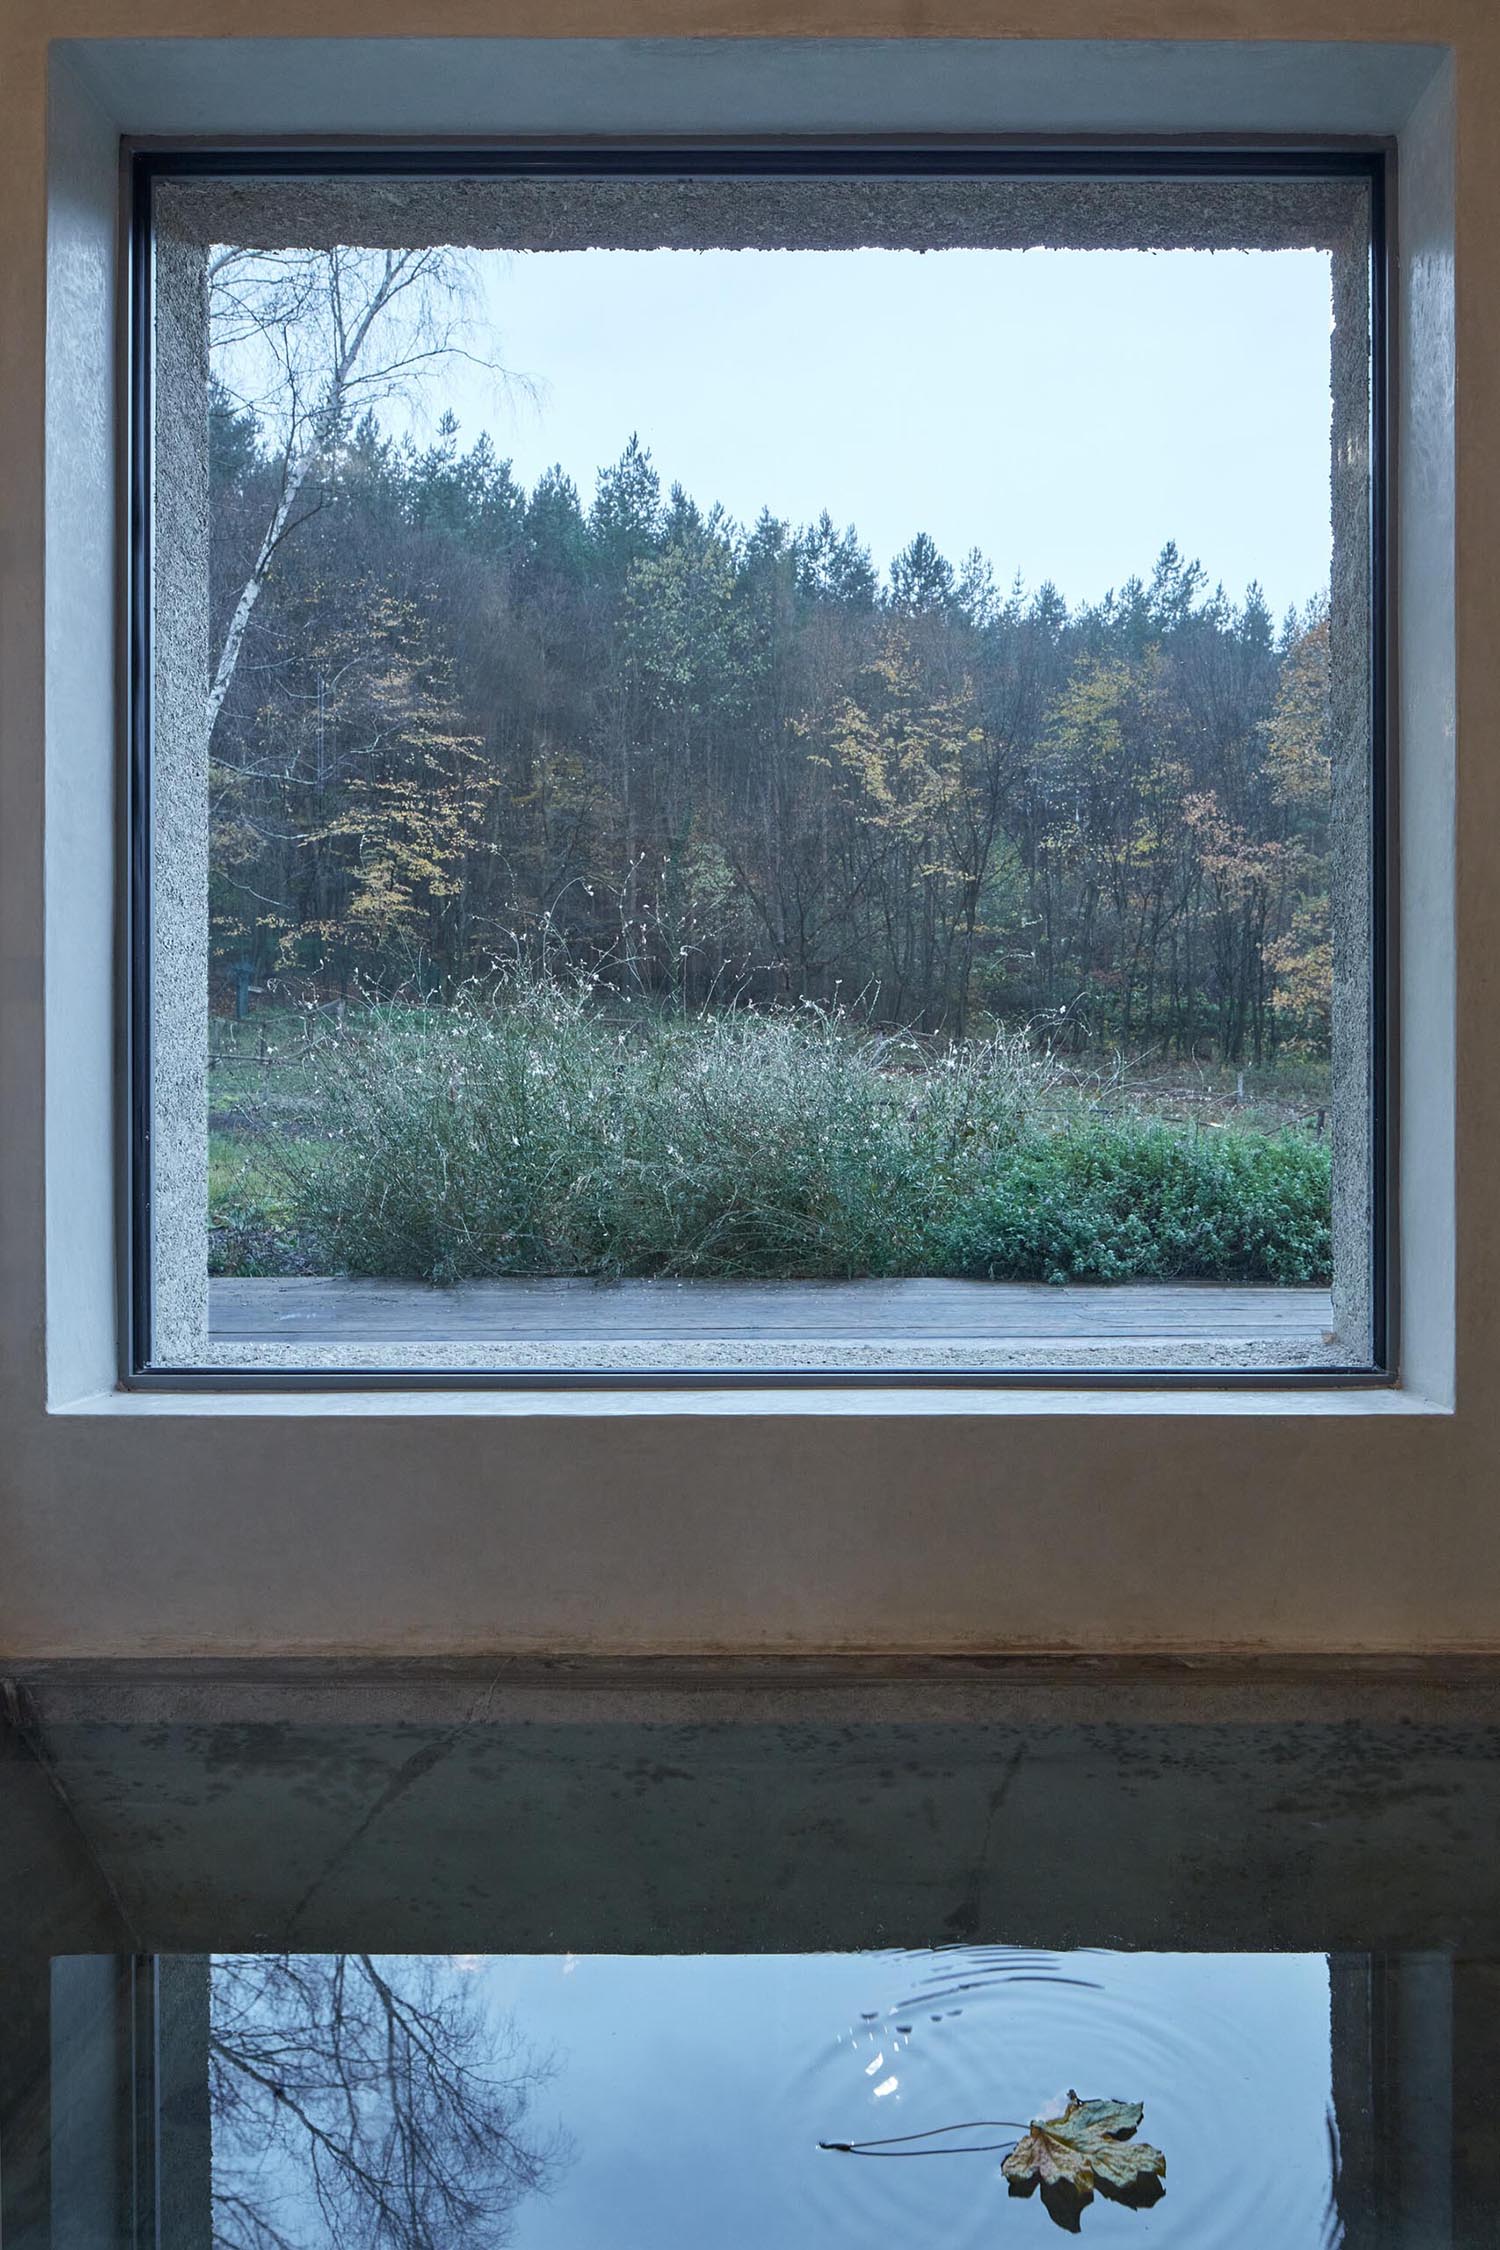 A sunken bathtub lies below a picture window with views of the trees.